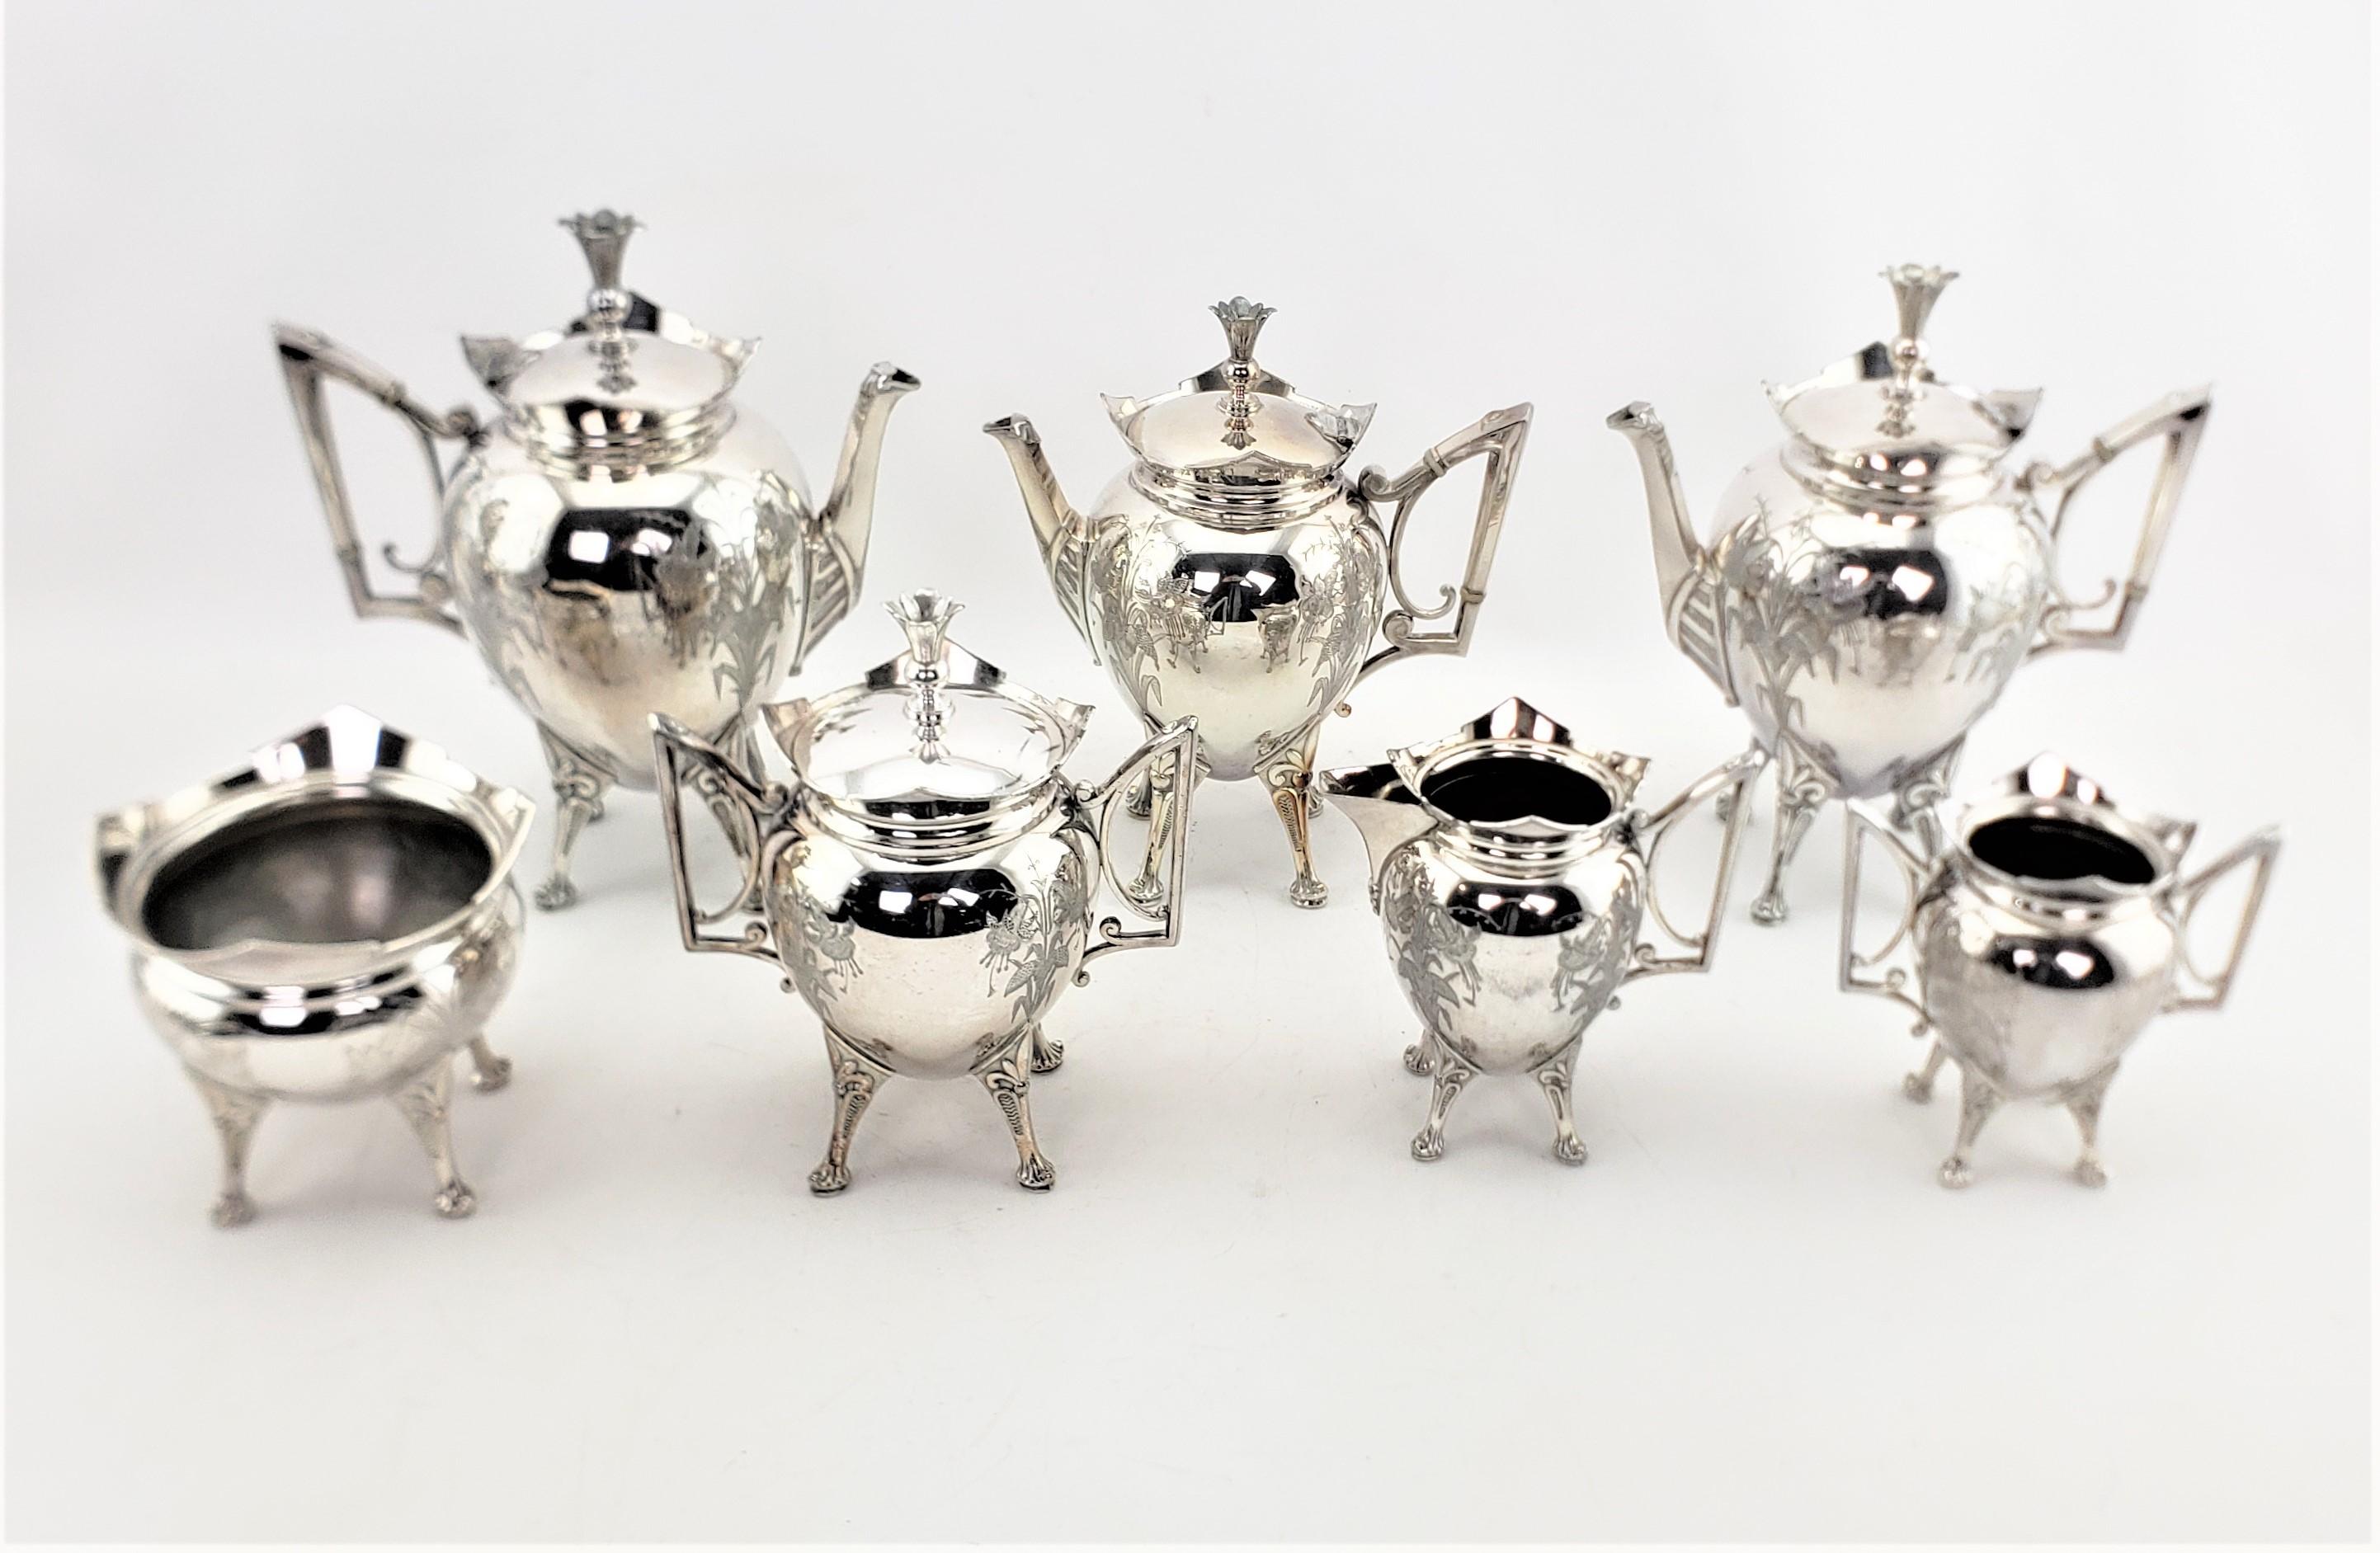 This antique silver plated tea set was made by the Meridian Company of the United States in approximately 1890 in the period Aesthetic Movement style. The set is composed of two teapots, a coffee pot, a covered sugar bowl and creamer, and two side